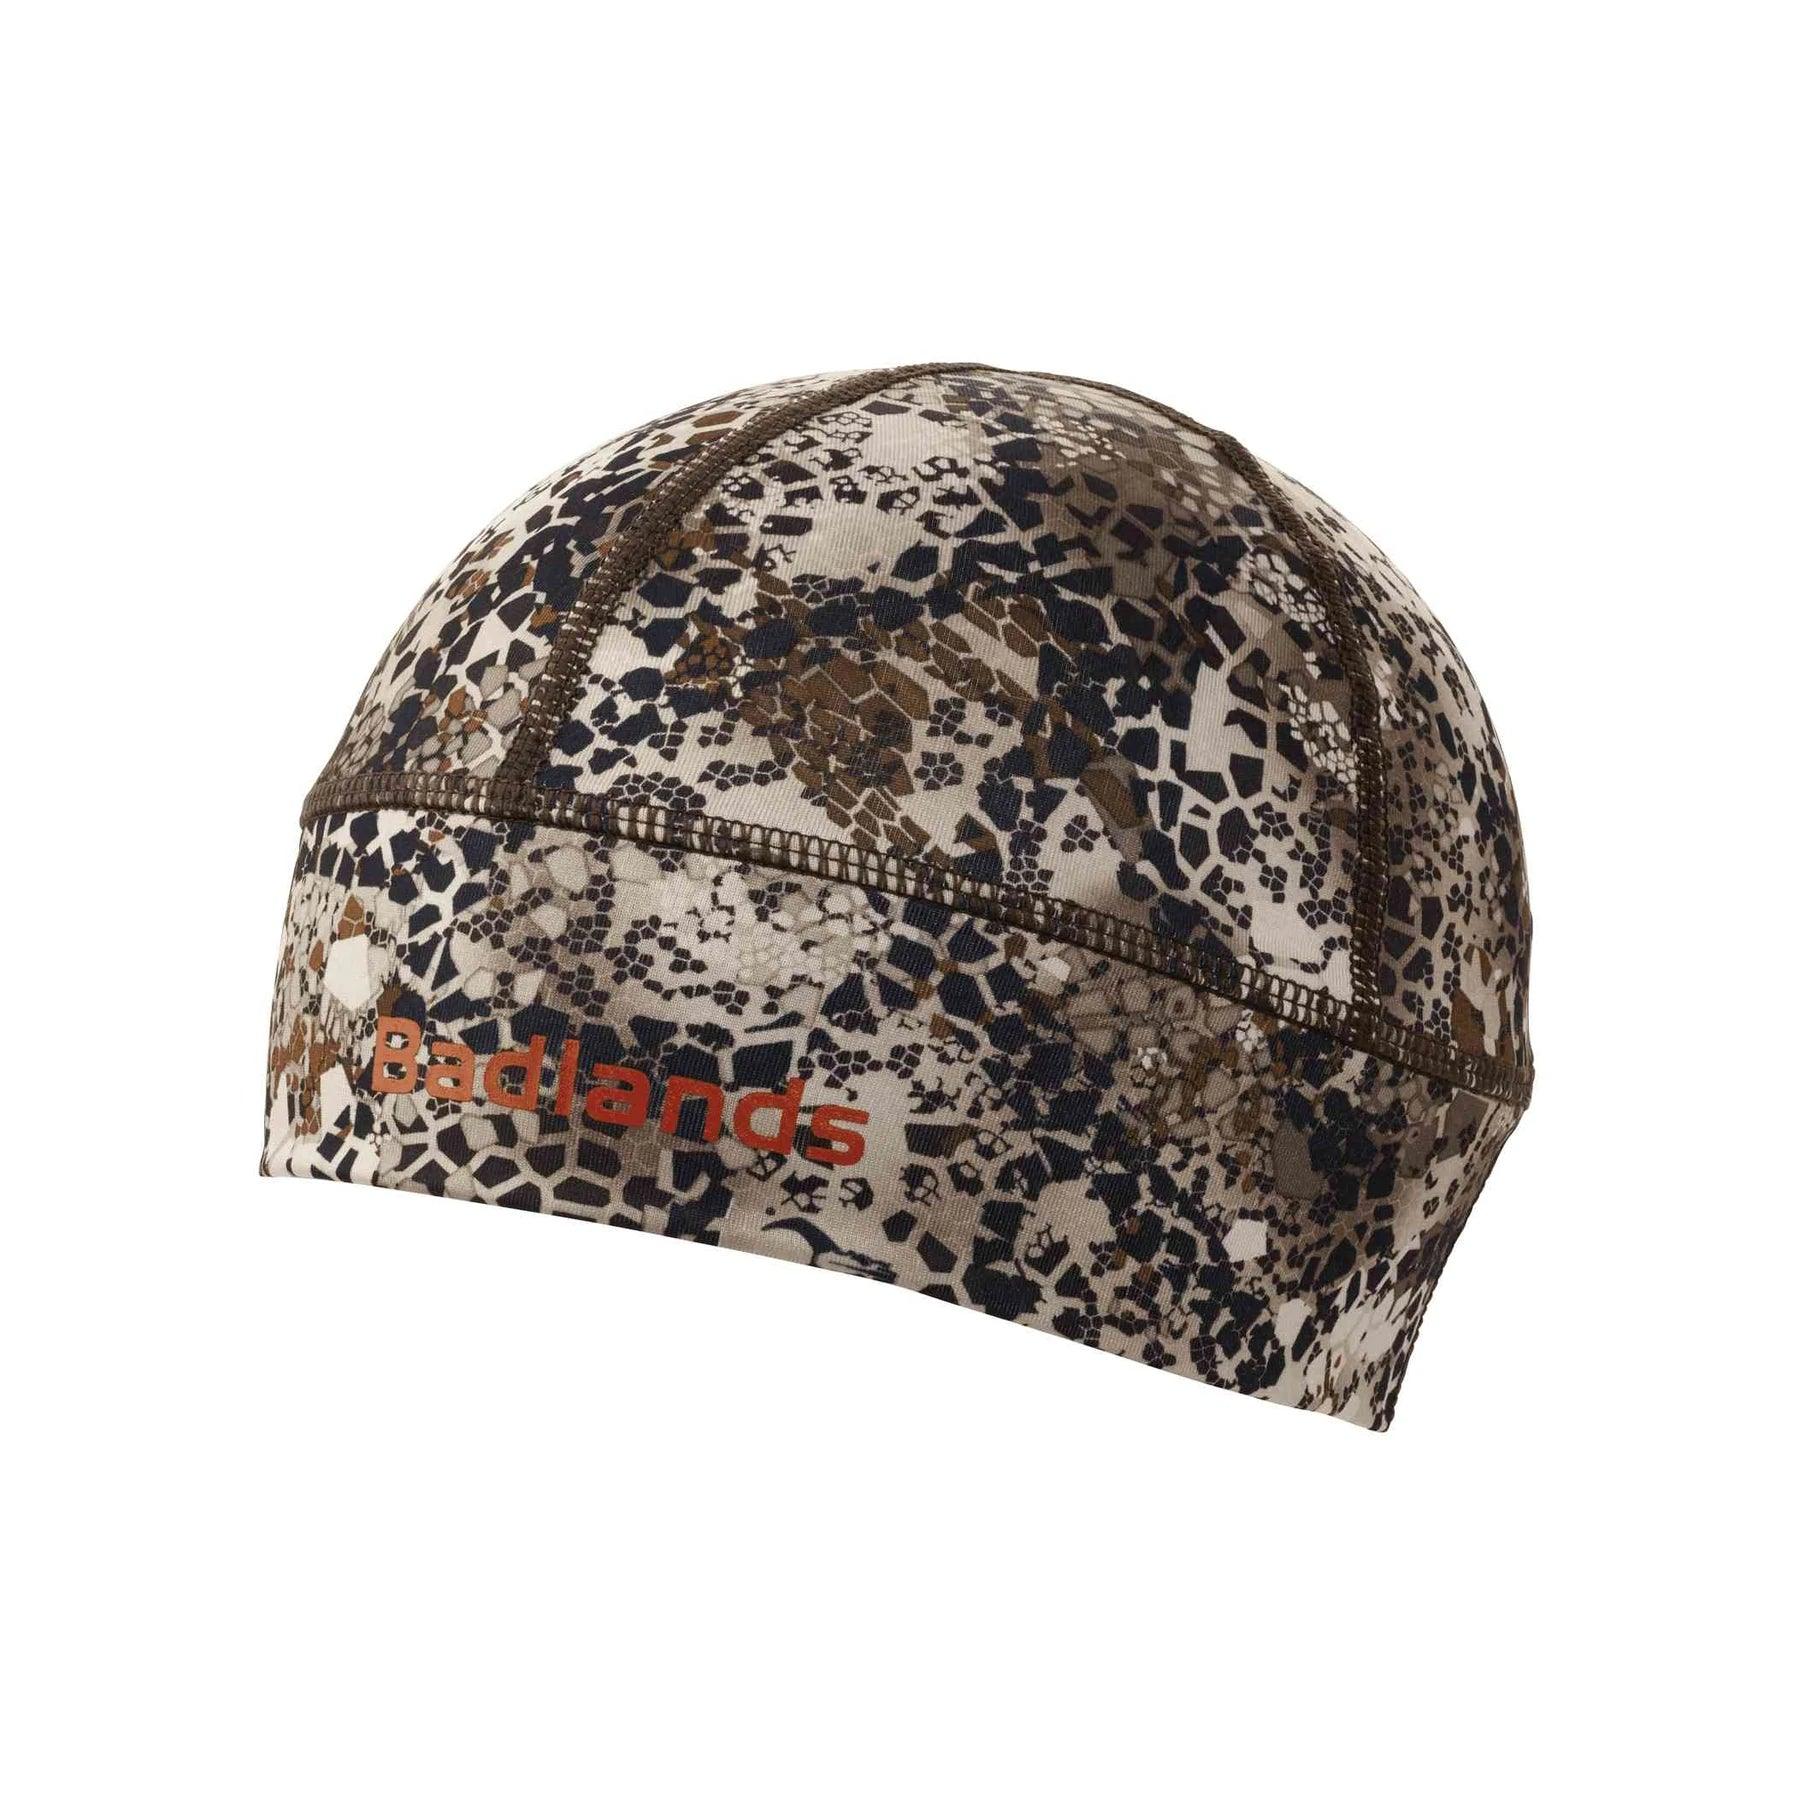 Badlands Algus Beanie - Leapfrog Outdoor Sports and Apparel